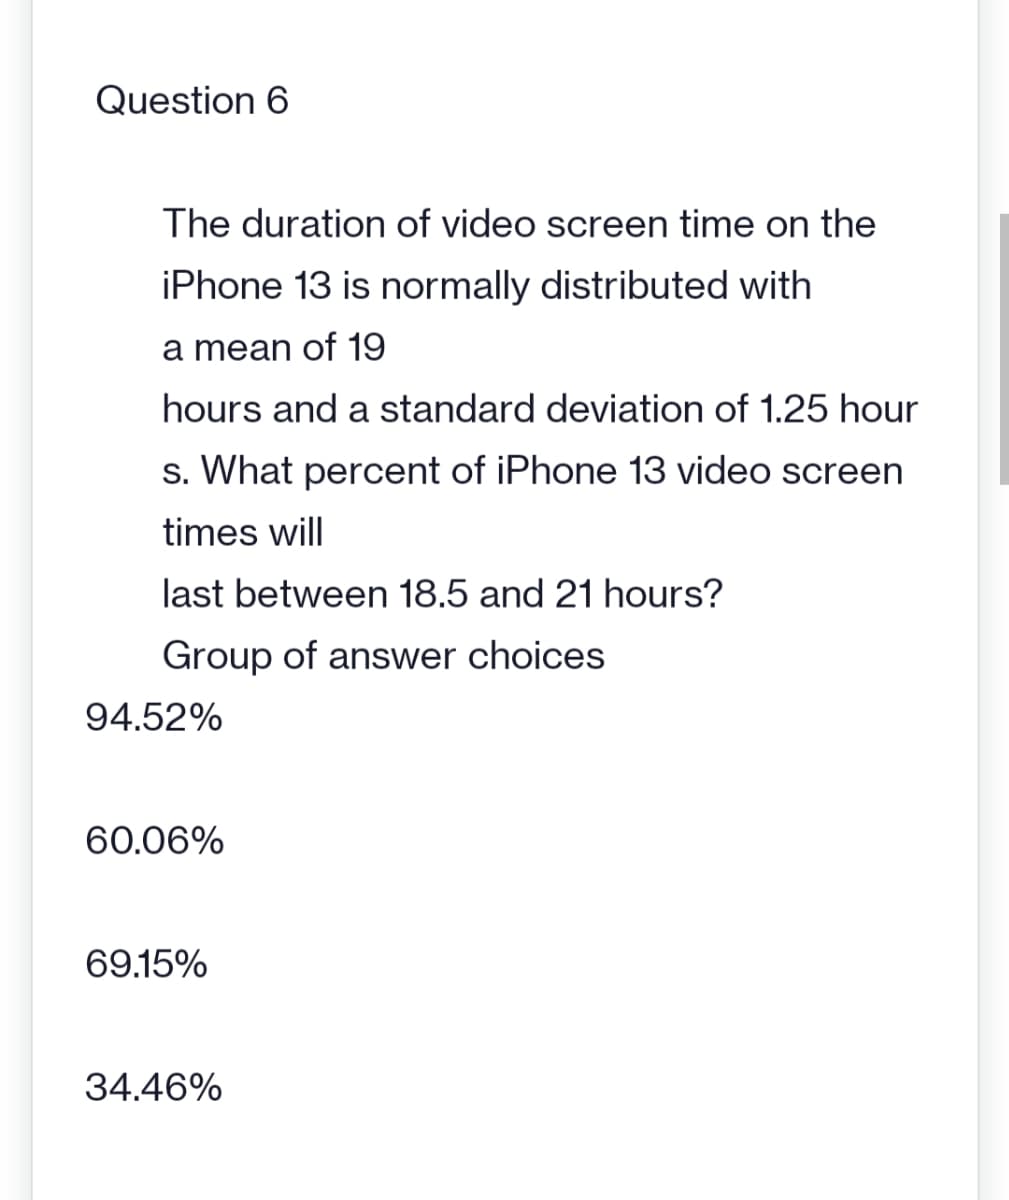 Question 6
The duration of video screen time on the
iPhone 13 is normally distributed with
a mean of 19
hours and a standard deviation of 1.25 hour
s. What percent of iPhone 13 video screen
times will
last between 18.5 and 21 hours?
Group of answer choices
94.52%
60.06%
69.15%
34.46%